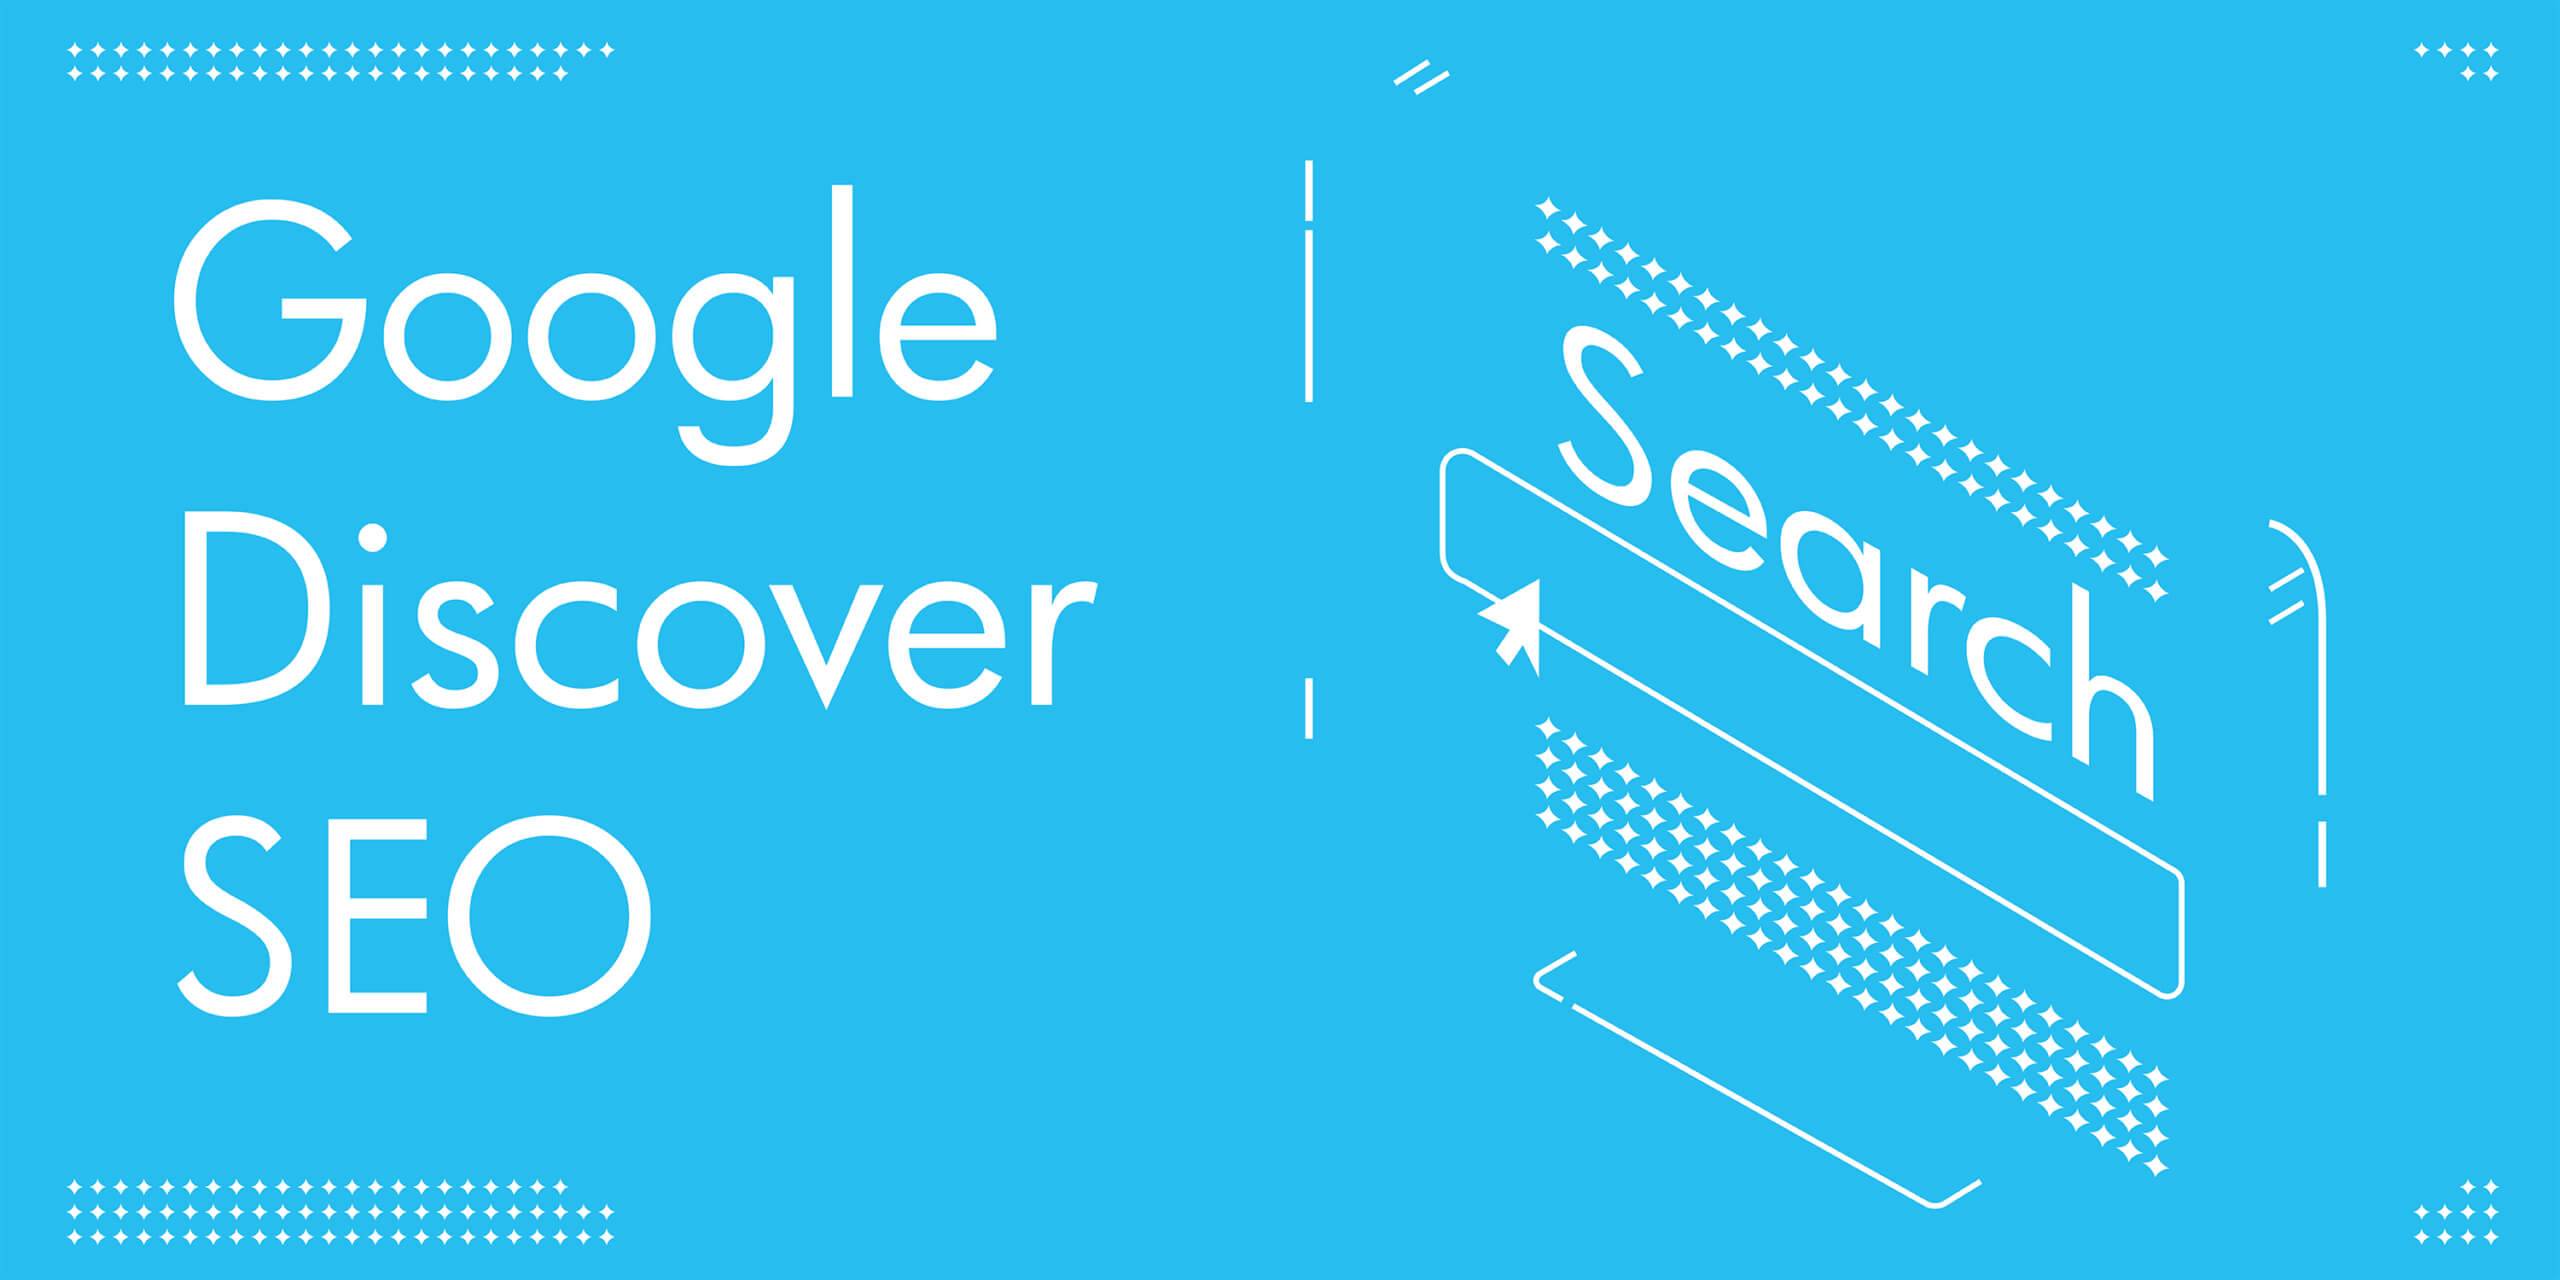 Google-Discover-SEO-How-to-Optimize-Your-Website-for-Google's-Mobile -Content-Feed-Banner